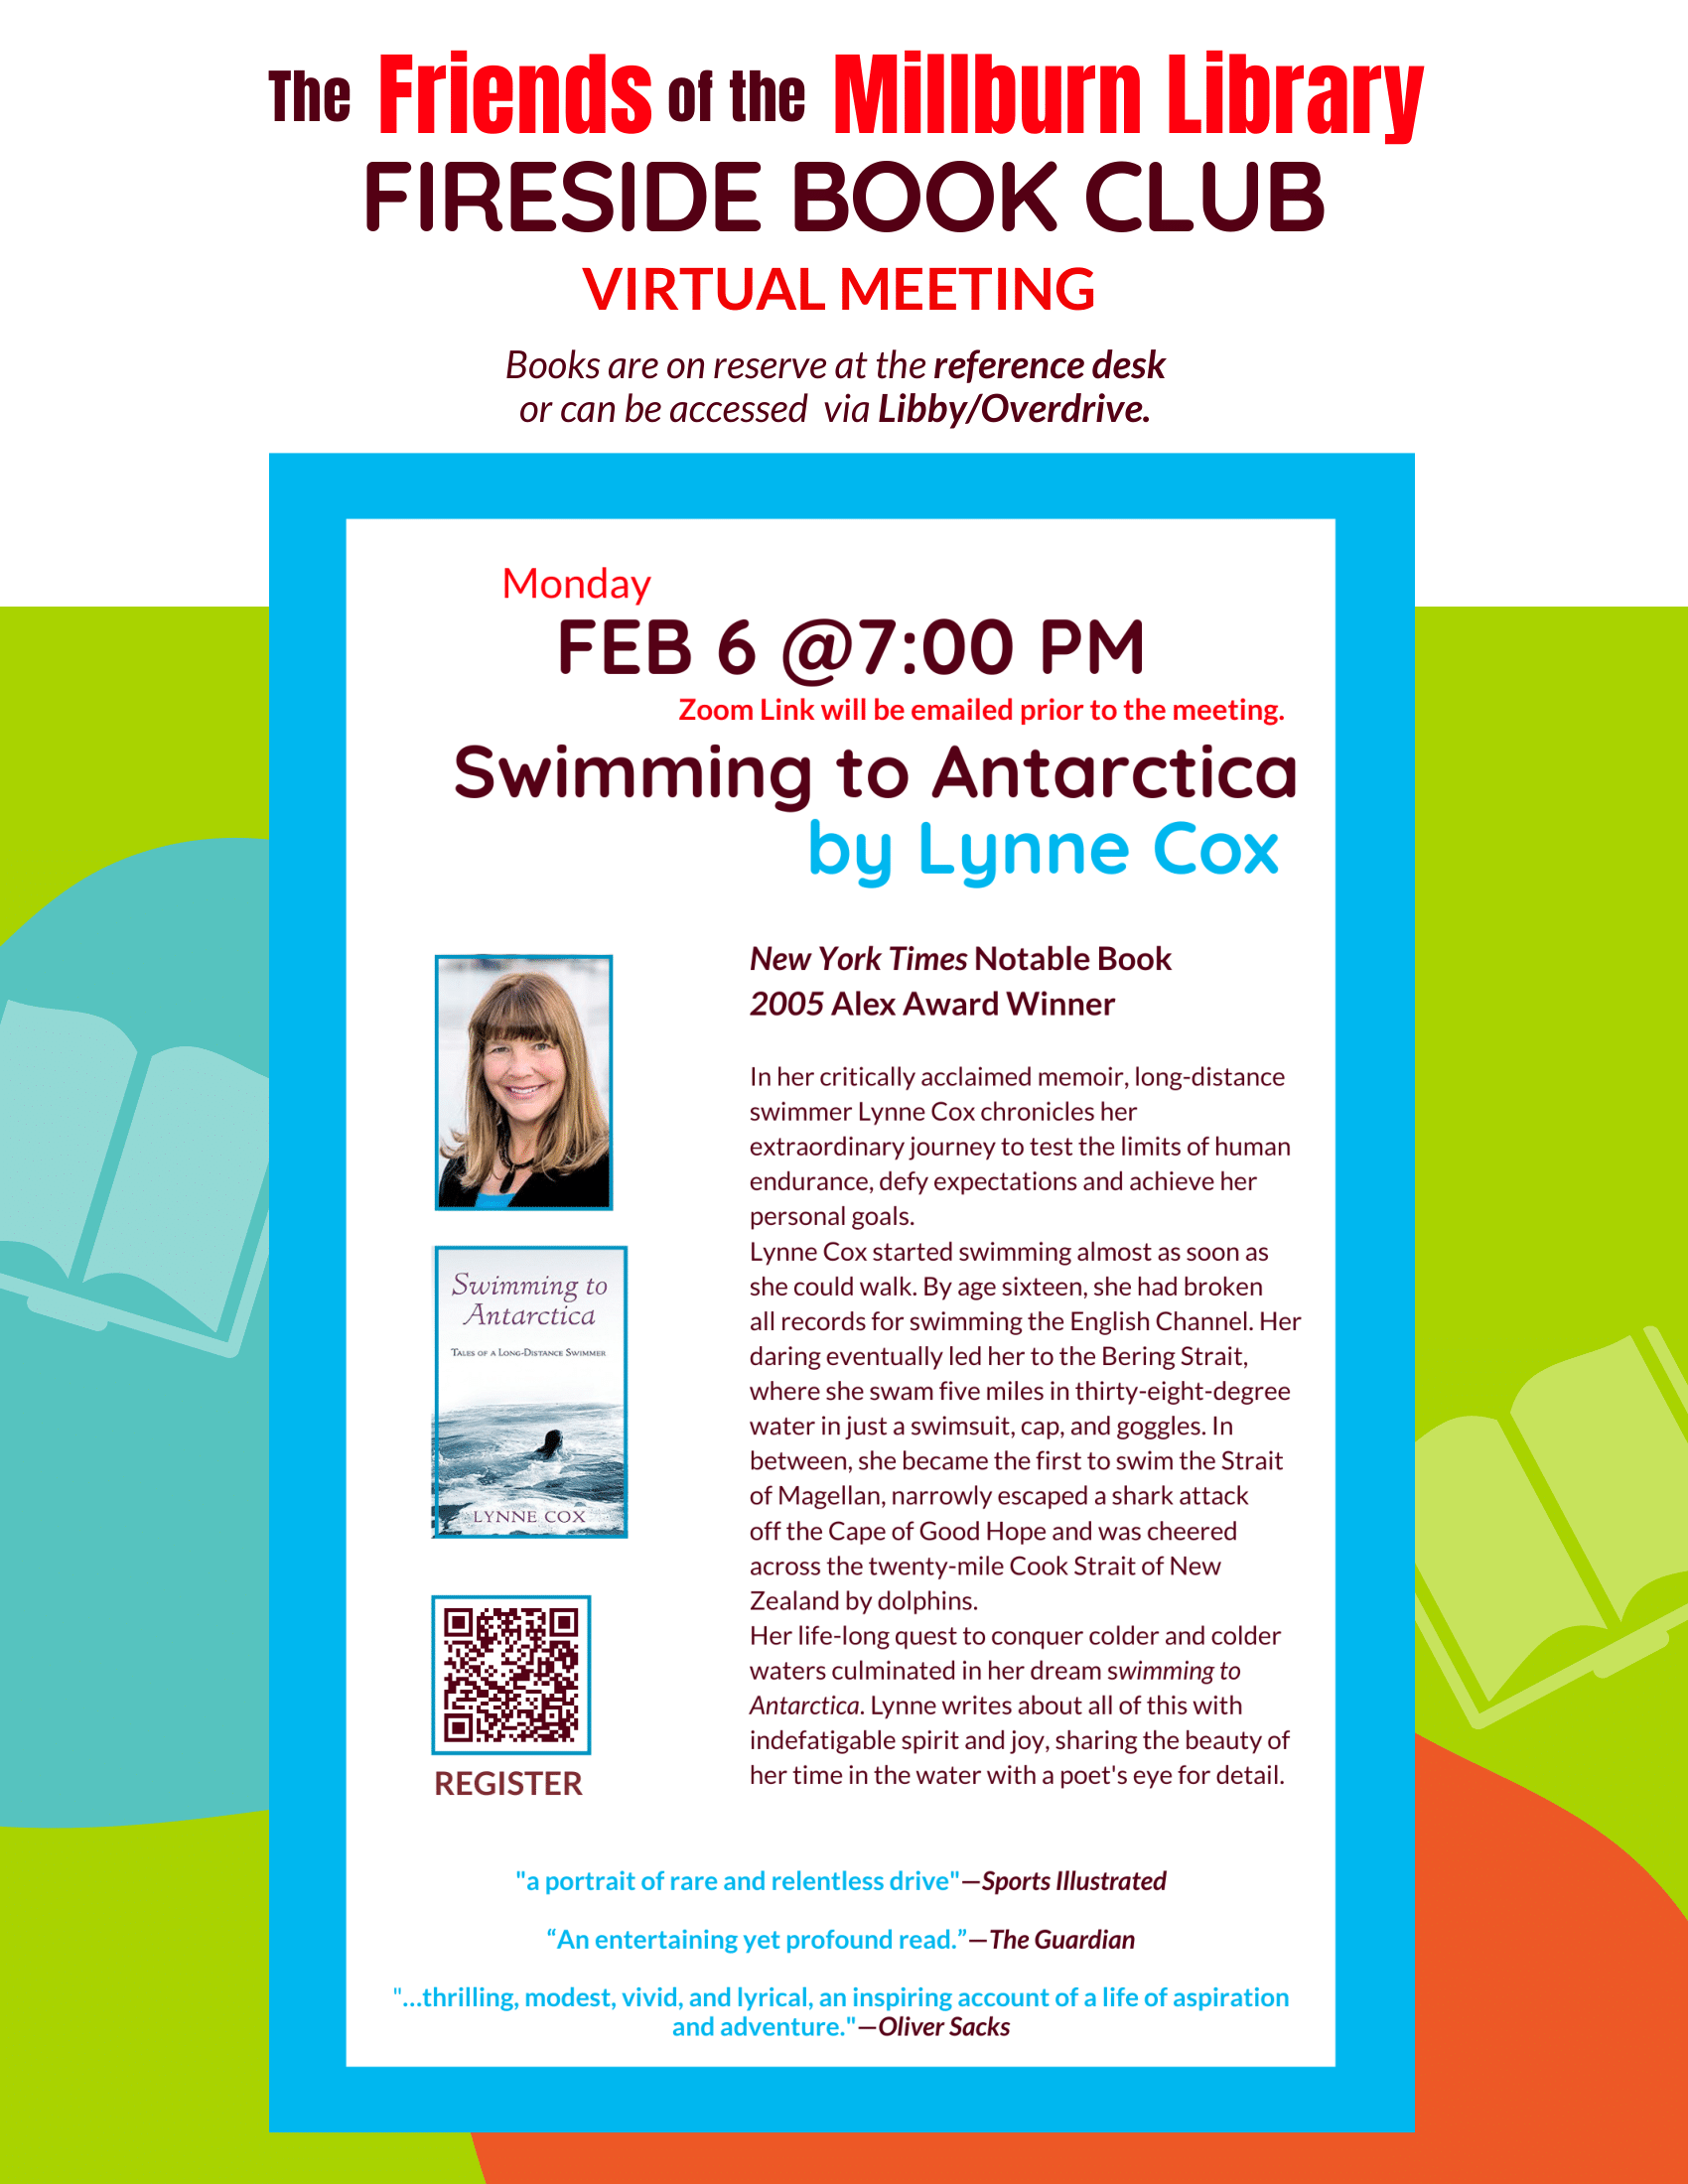 Fireside Book Club: Monday, Feb. 6 @ 7:00pm. Swimming to Antarctica, by Lynne Cox. Zoom link to be emailed prior to the meeting.